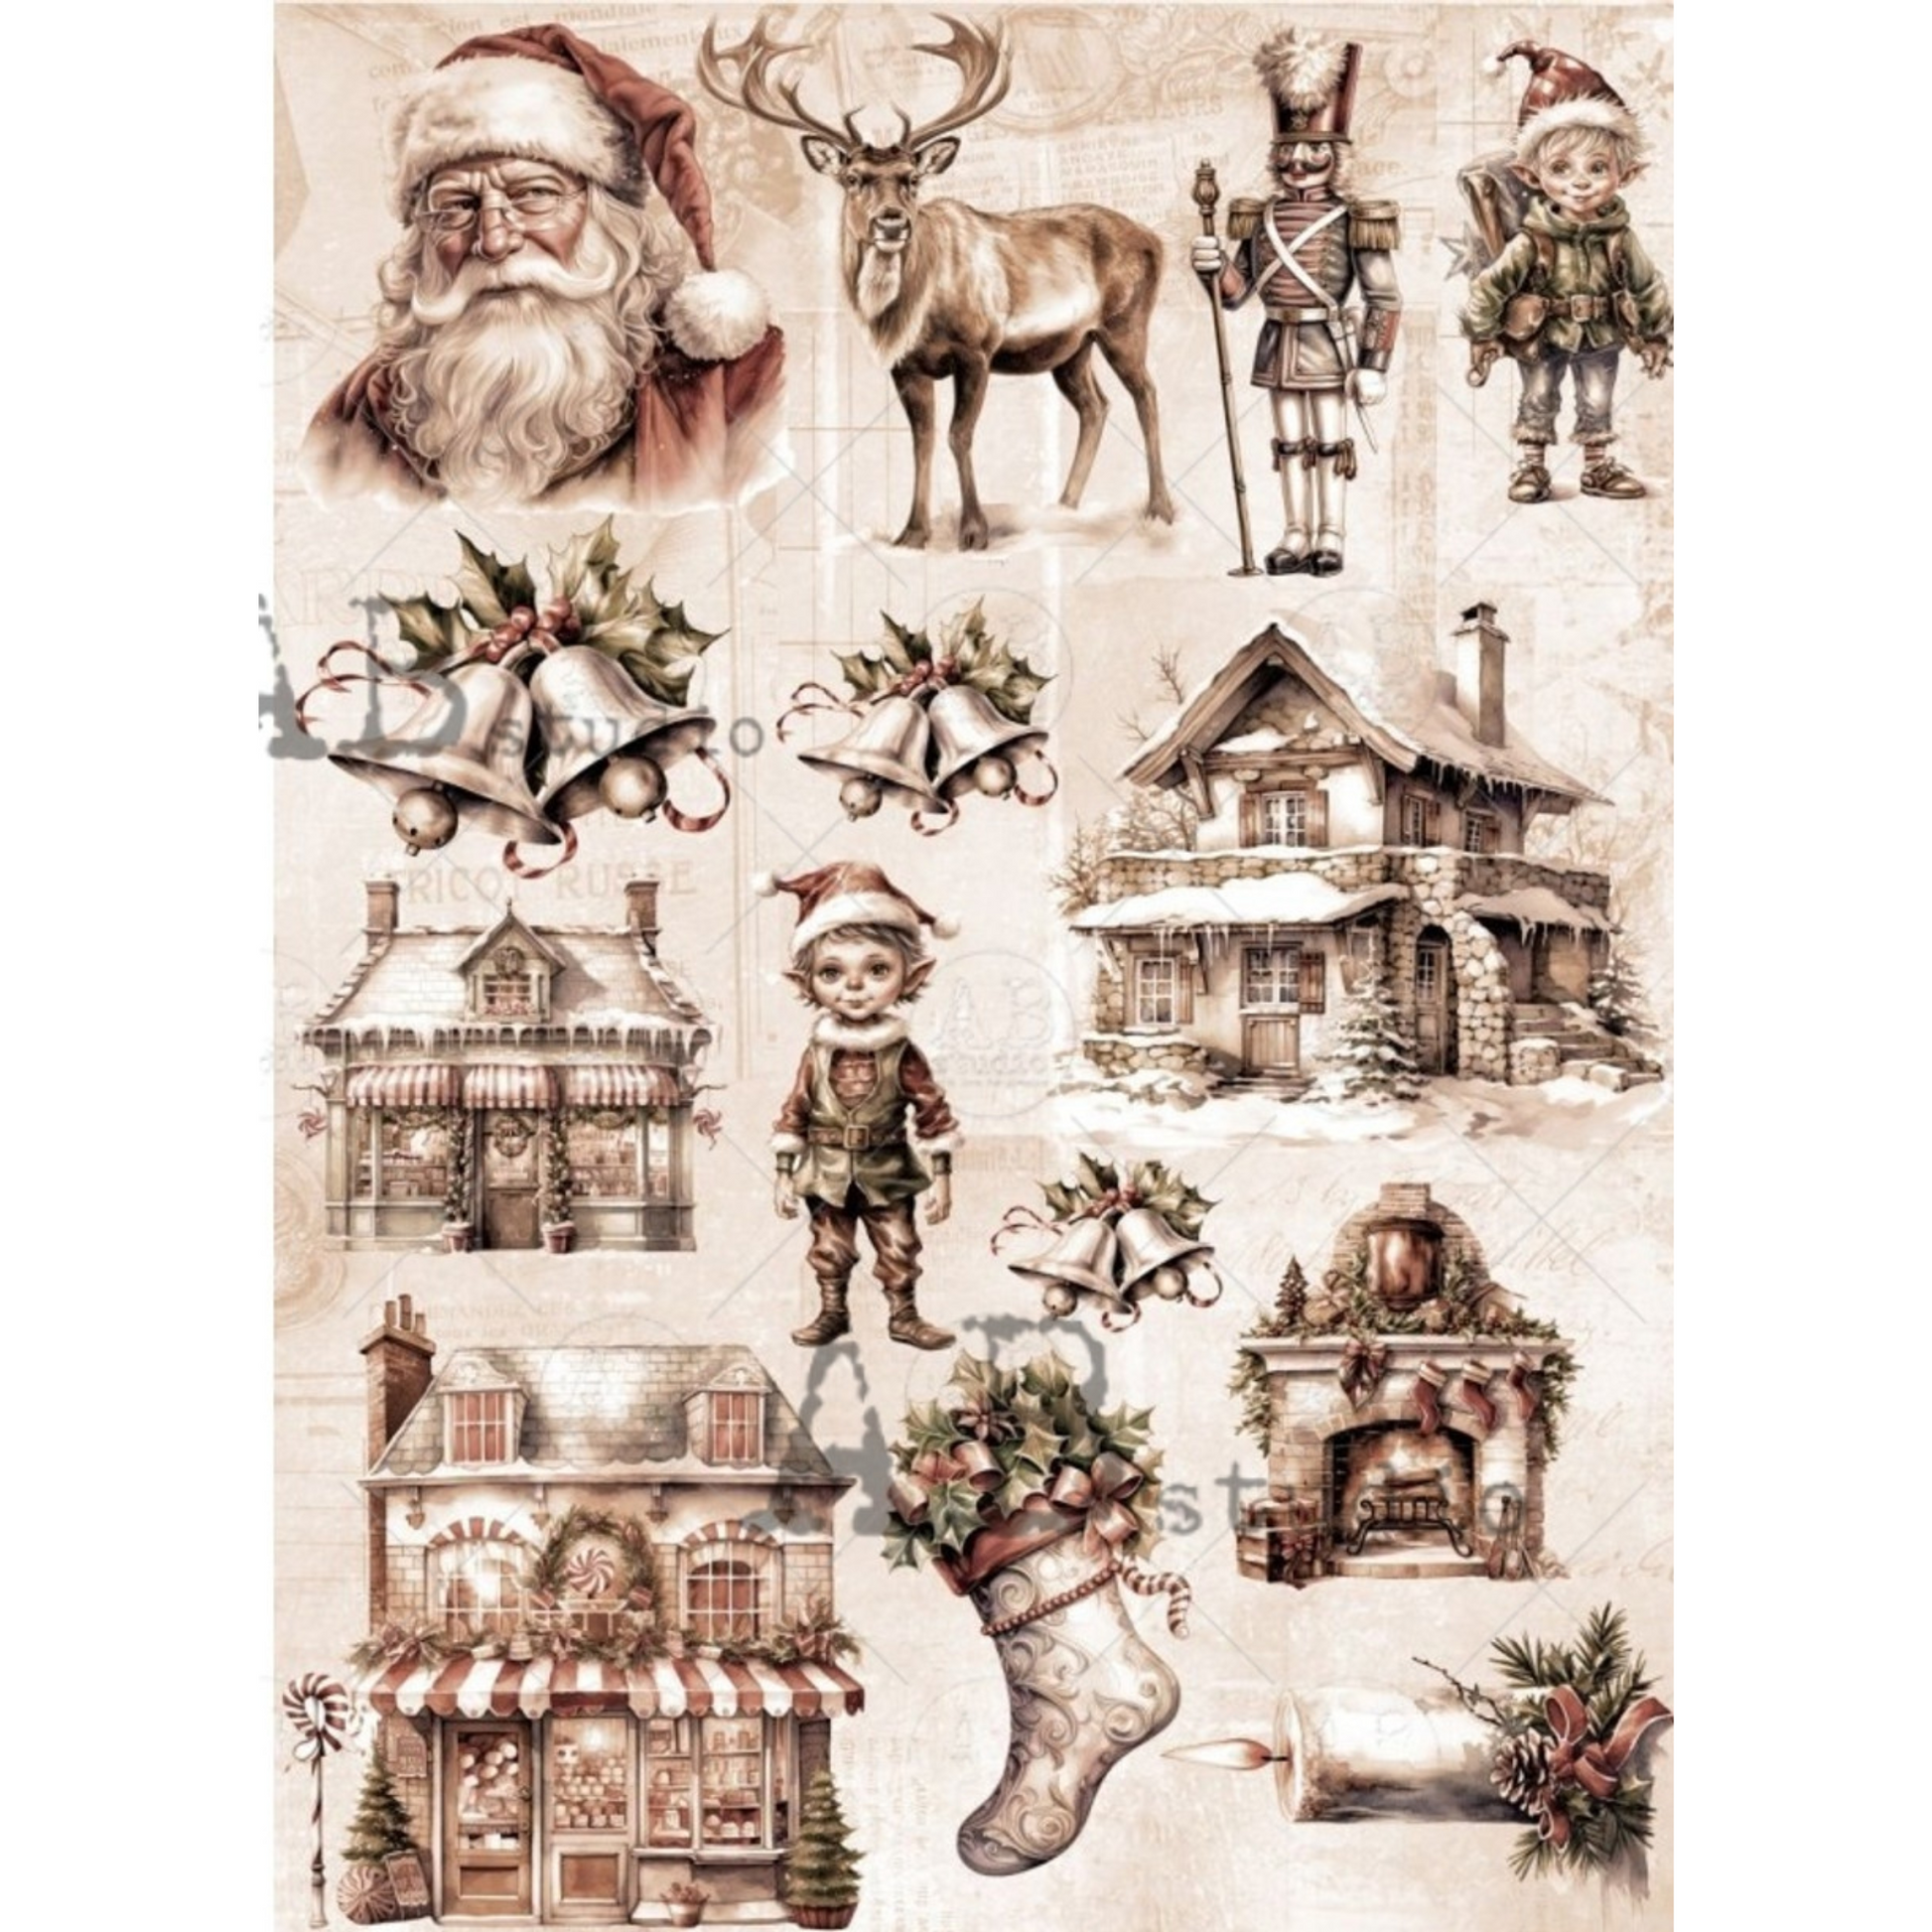 "Sepia Elves and Holiday Stores" decoupage rice paper by AB Studio. Available at Milton's Daughter.